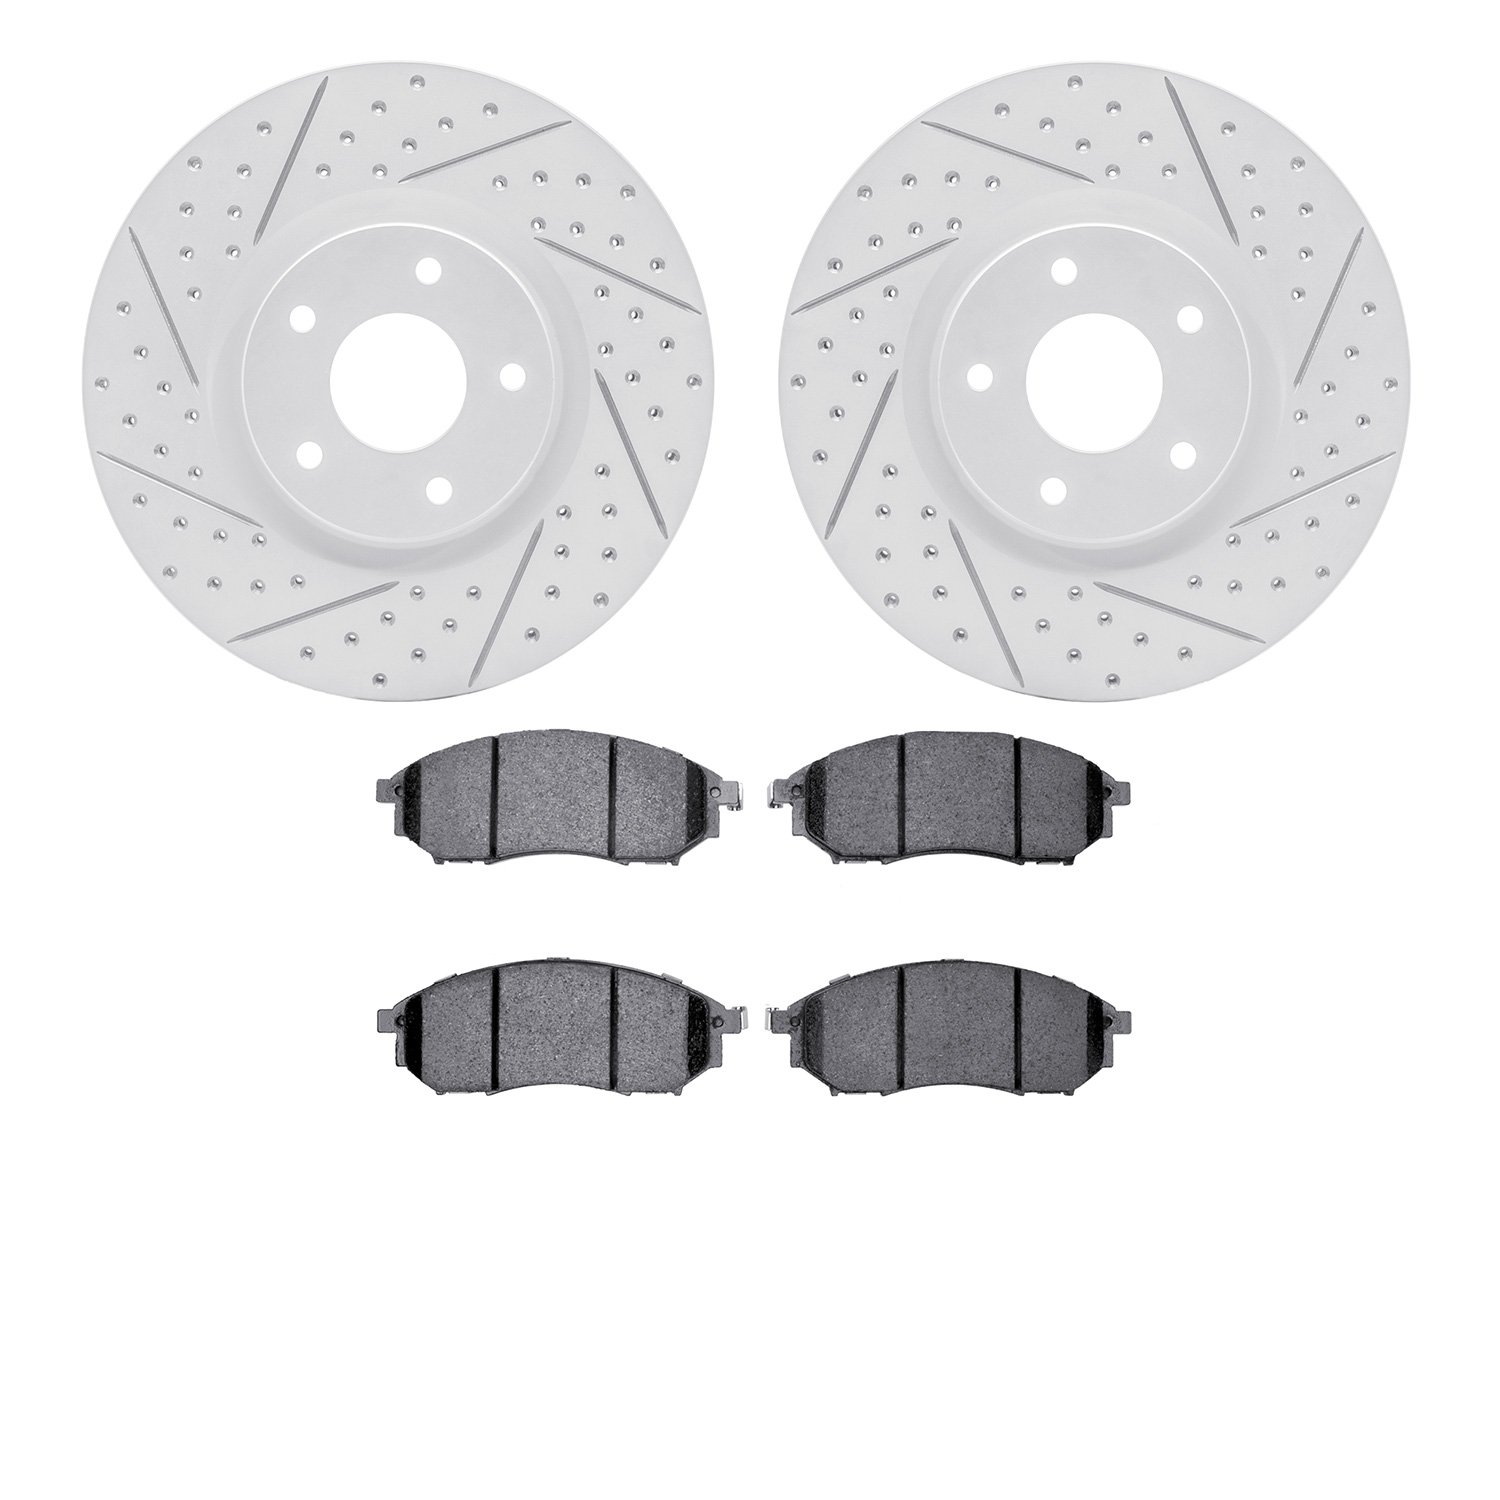 2502-67032 Geoperformance Drilled/Slotted Rotors w/5000 Advanced Brake Pads Kit, 2009-2016 Renault, Position: Front